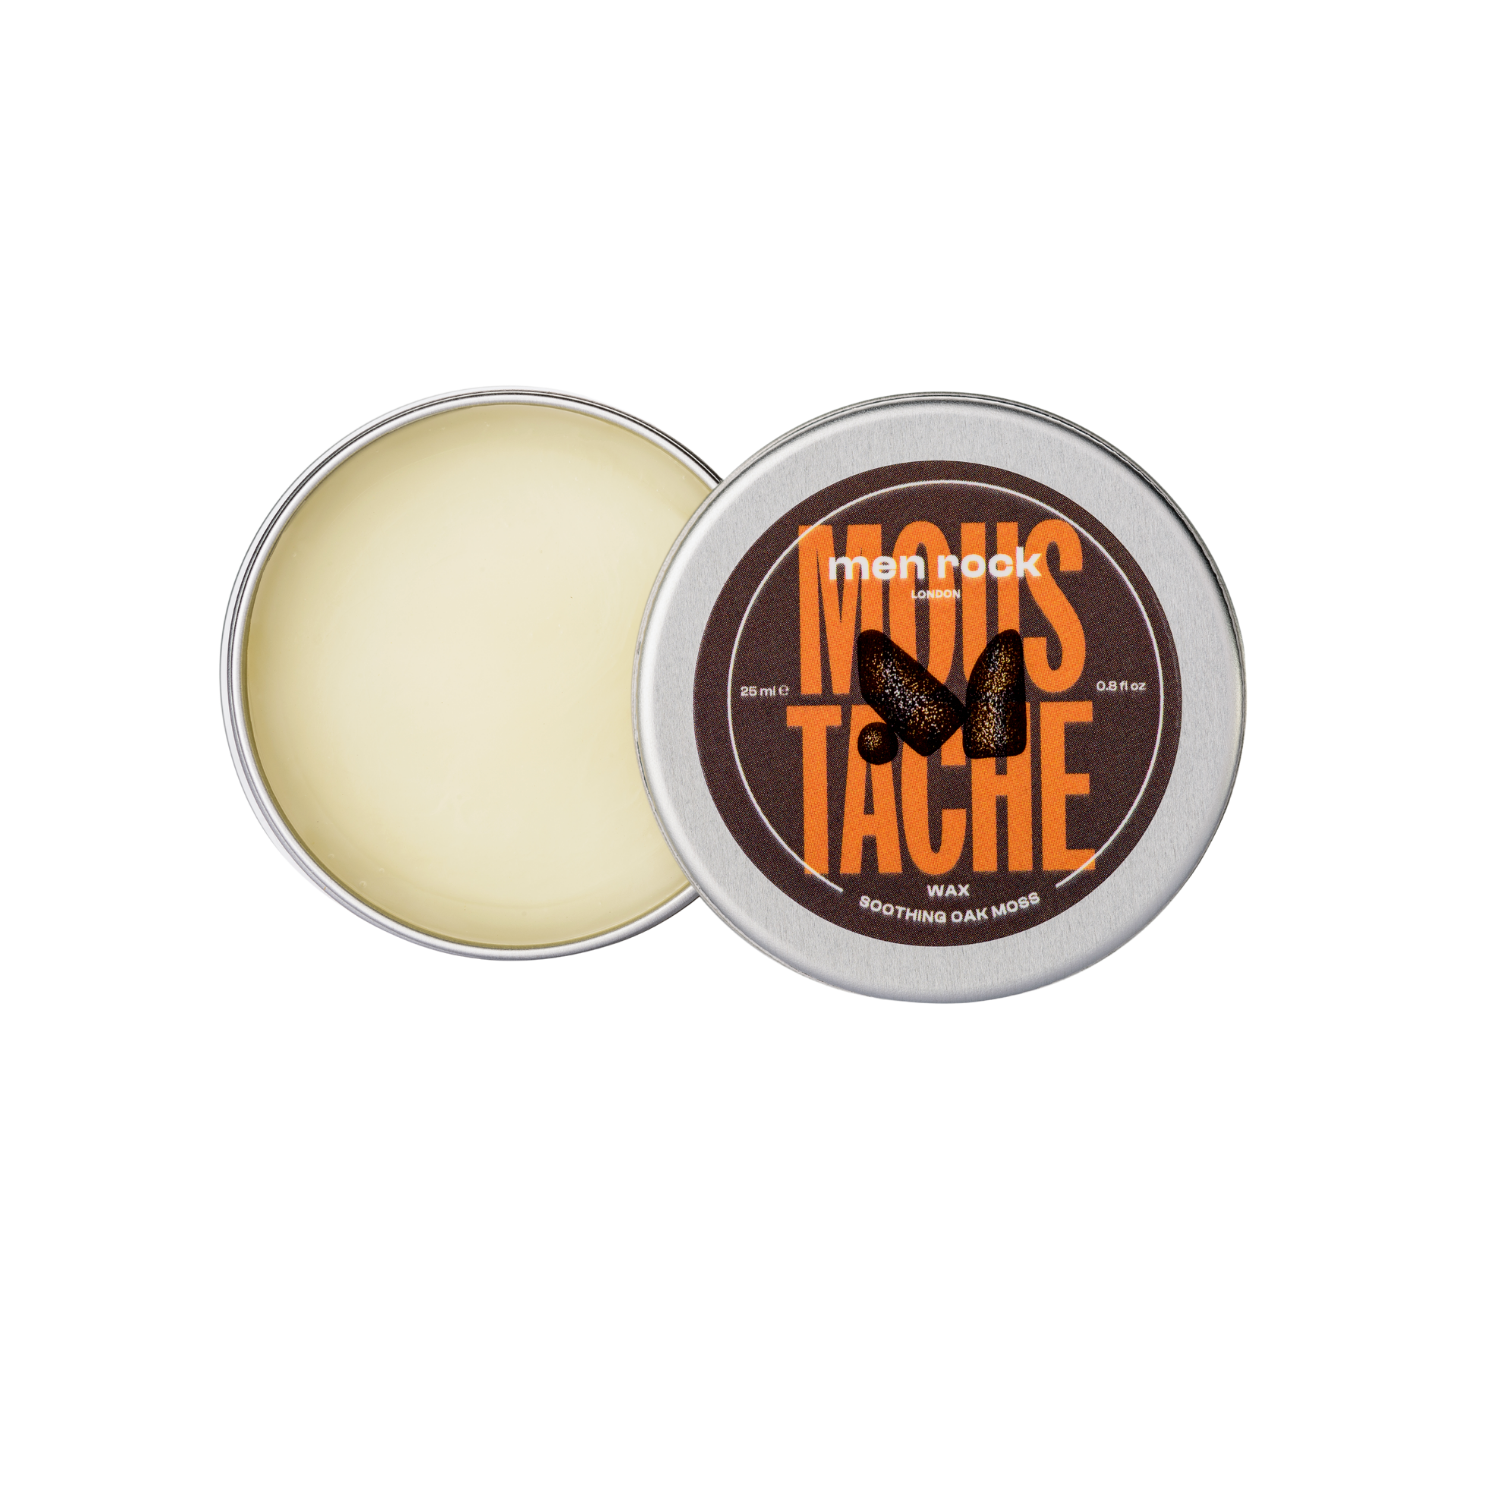 Moustache and beard wax for taming and styling facial hair in a 25ml open tin